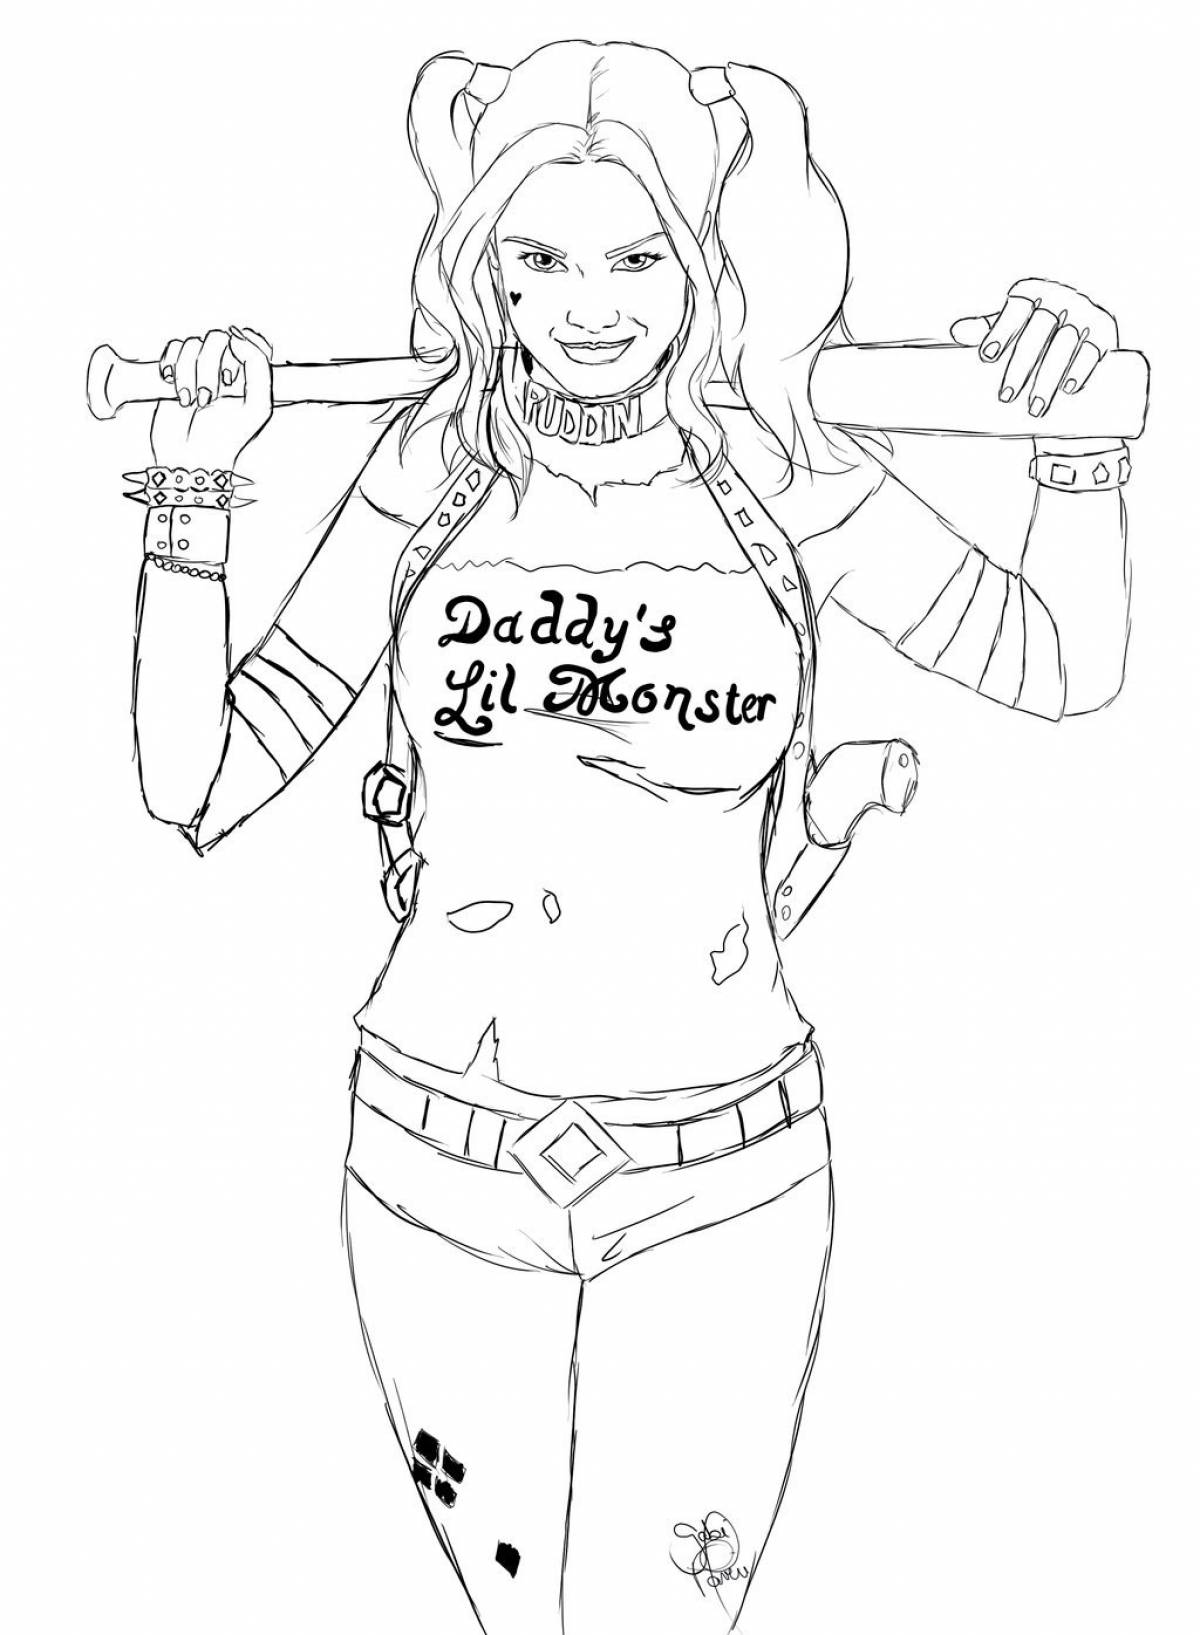 Harley quinn coloring page